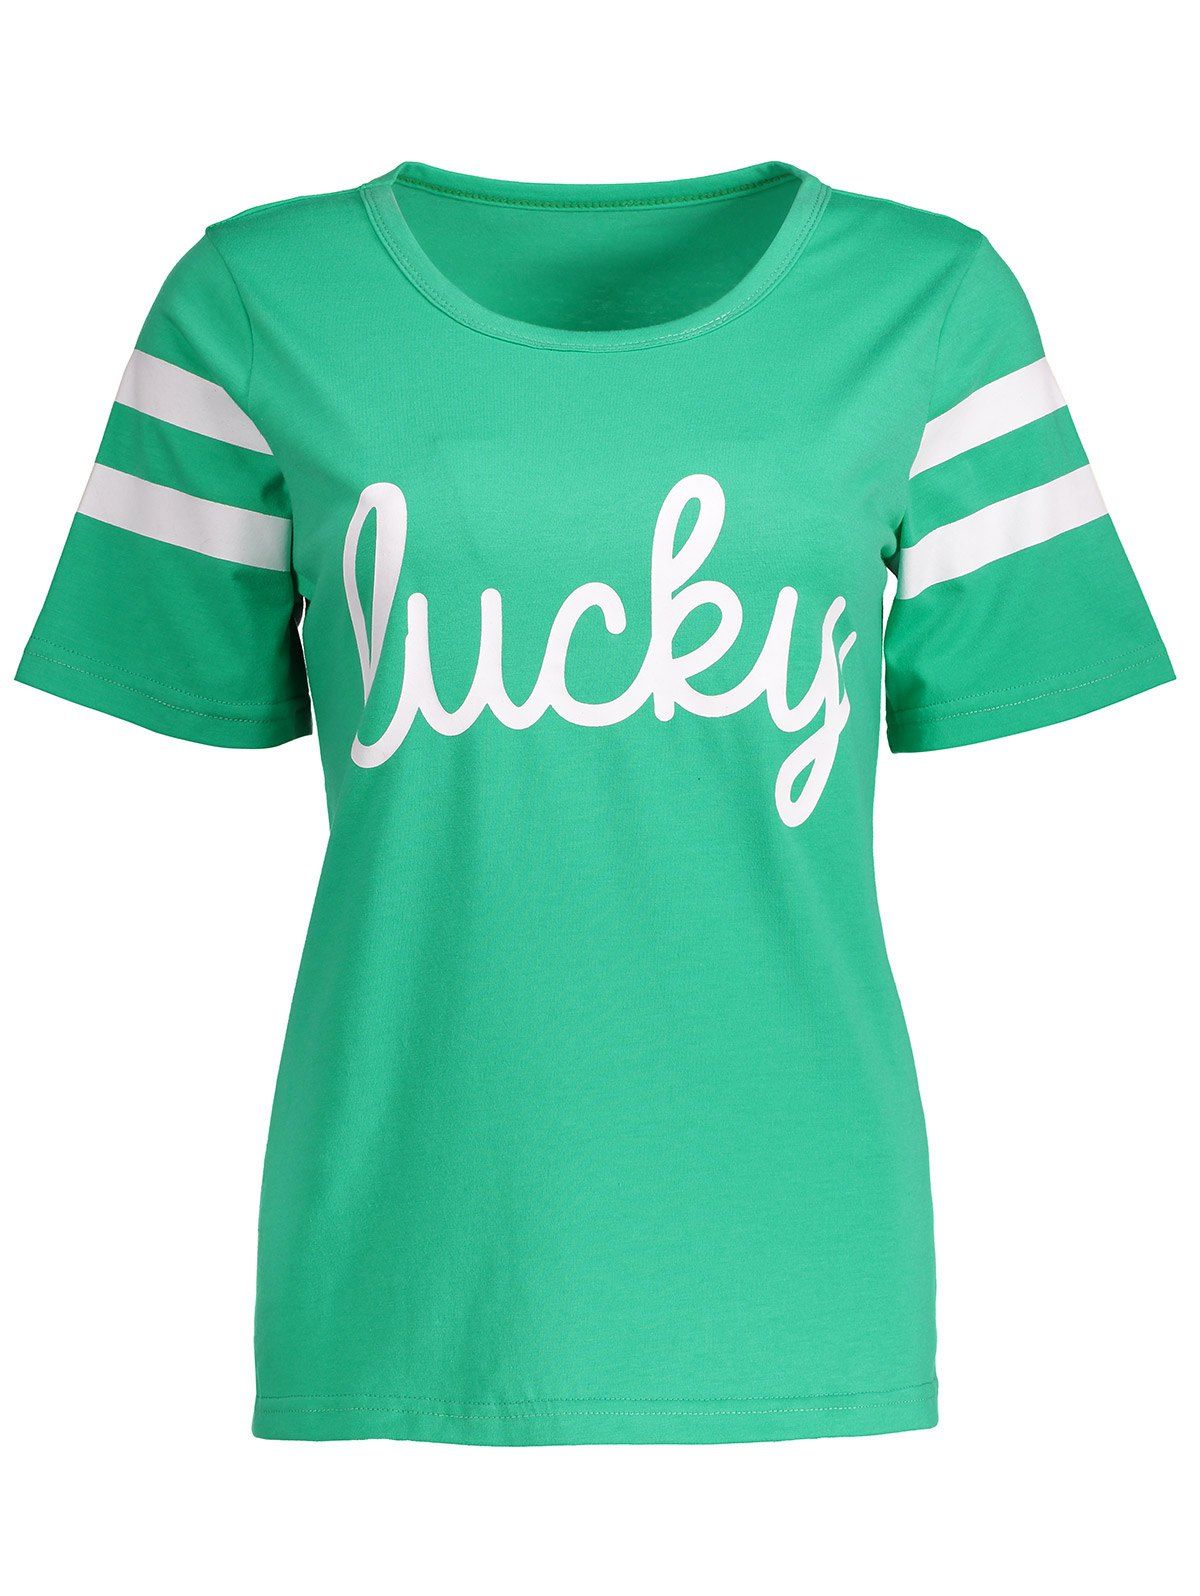 Varsity Striped Lucky Funny Graphic Tees - LIGHT GREEN M